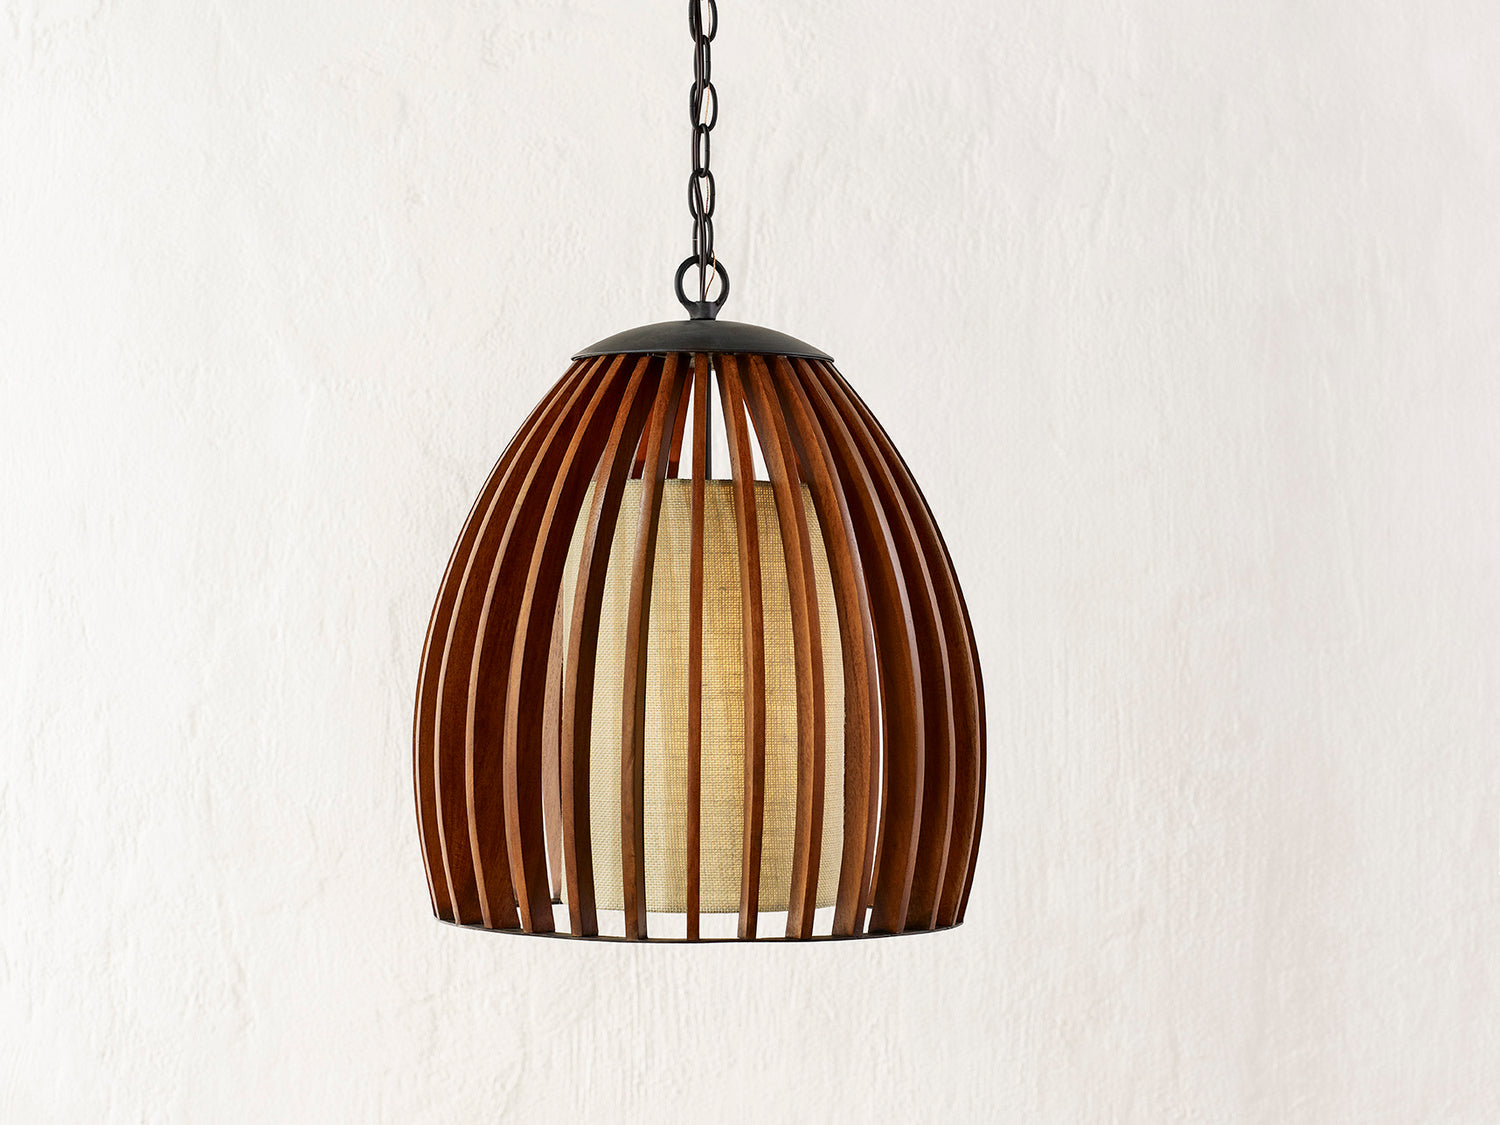 One Light Pendant from the Carling collection in Old Iron/Polished Fruitwood finish